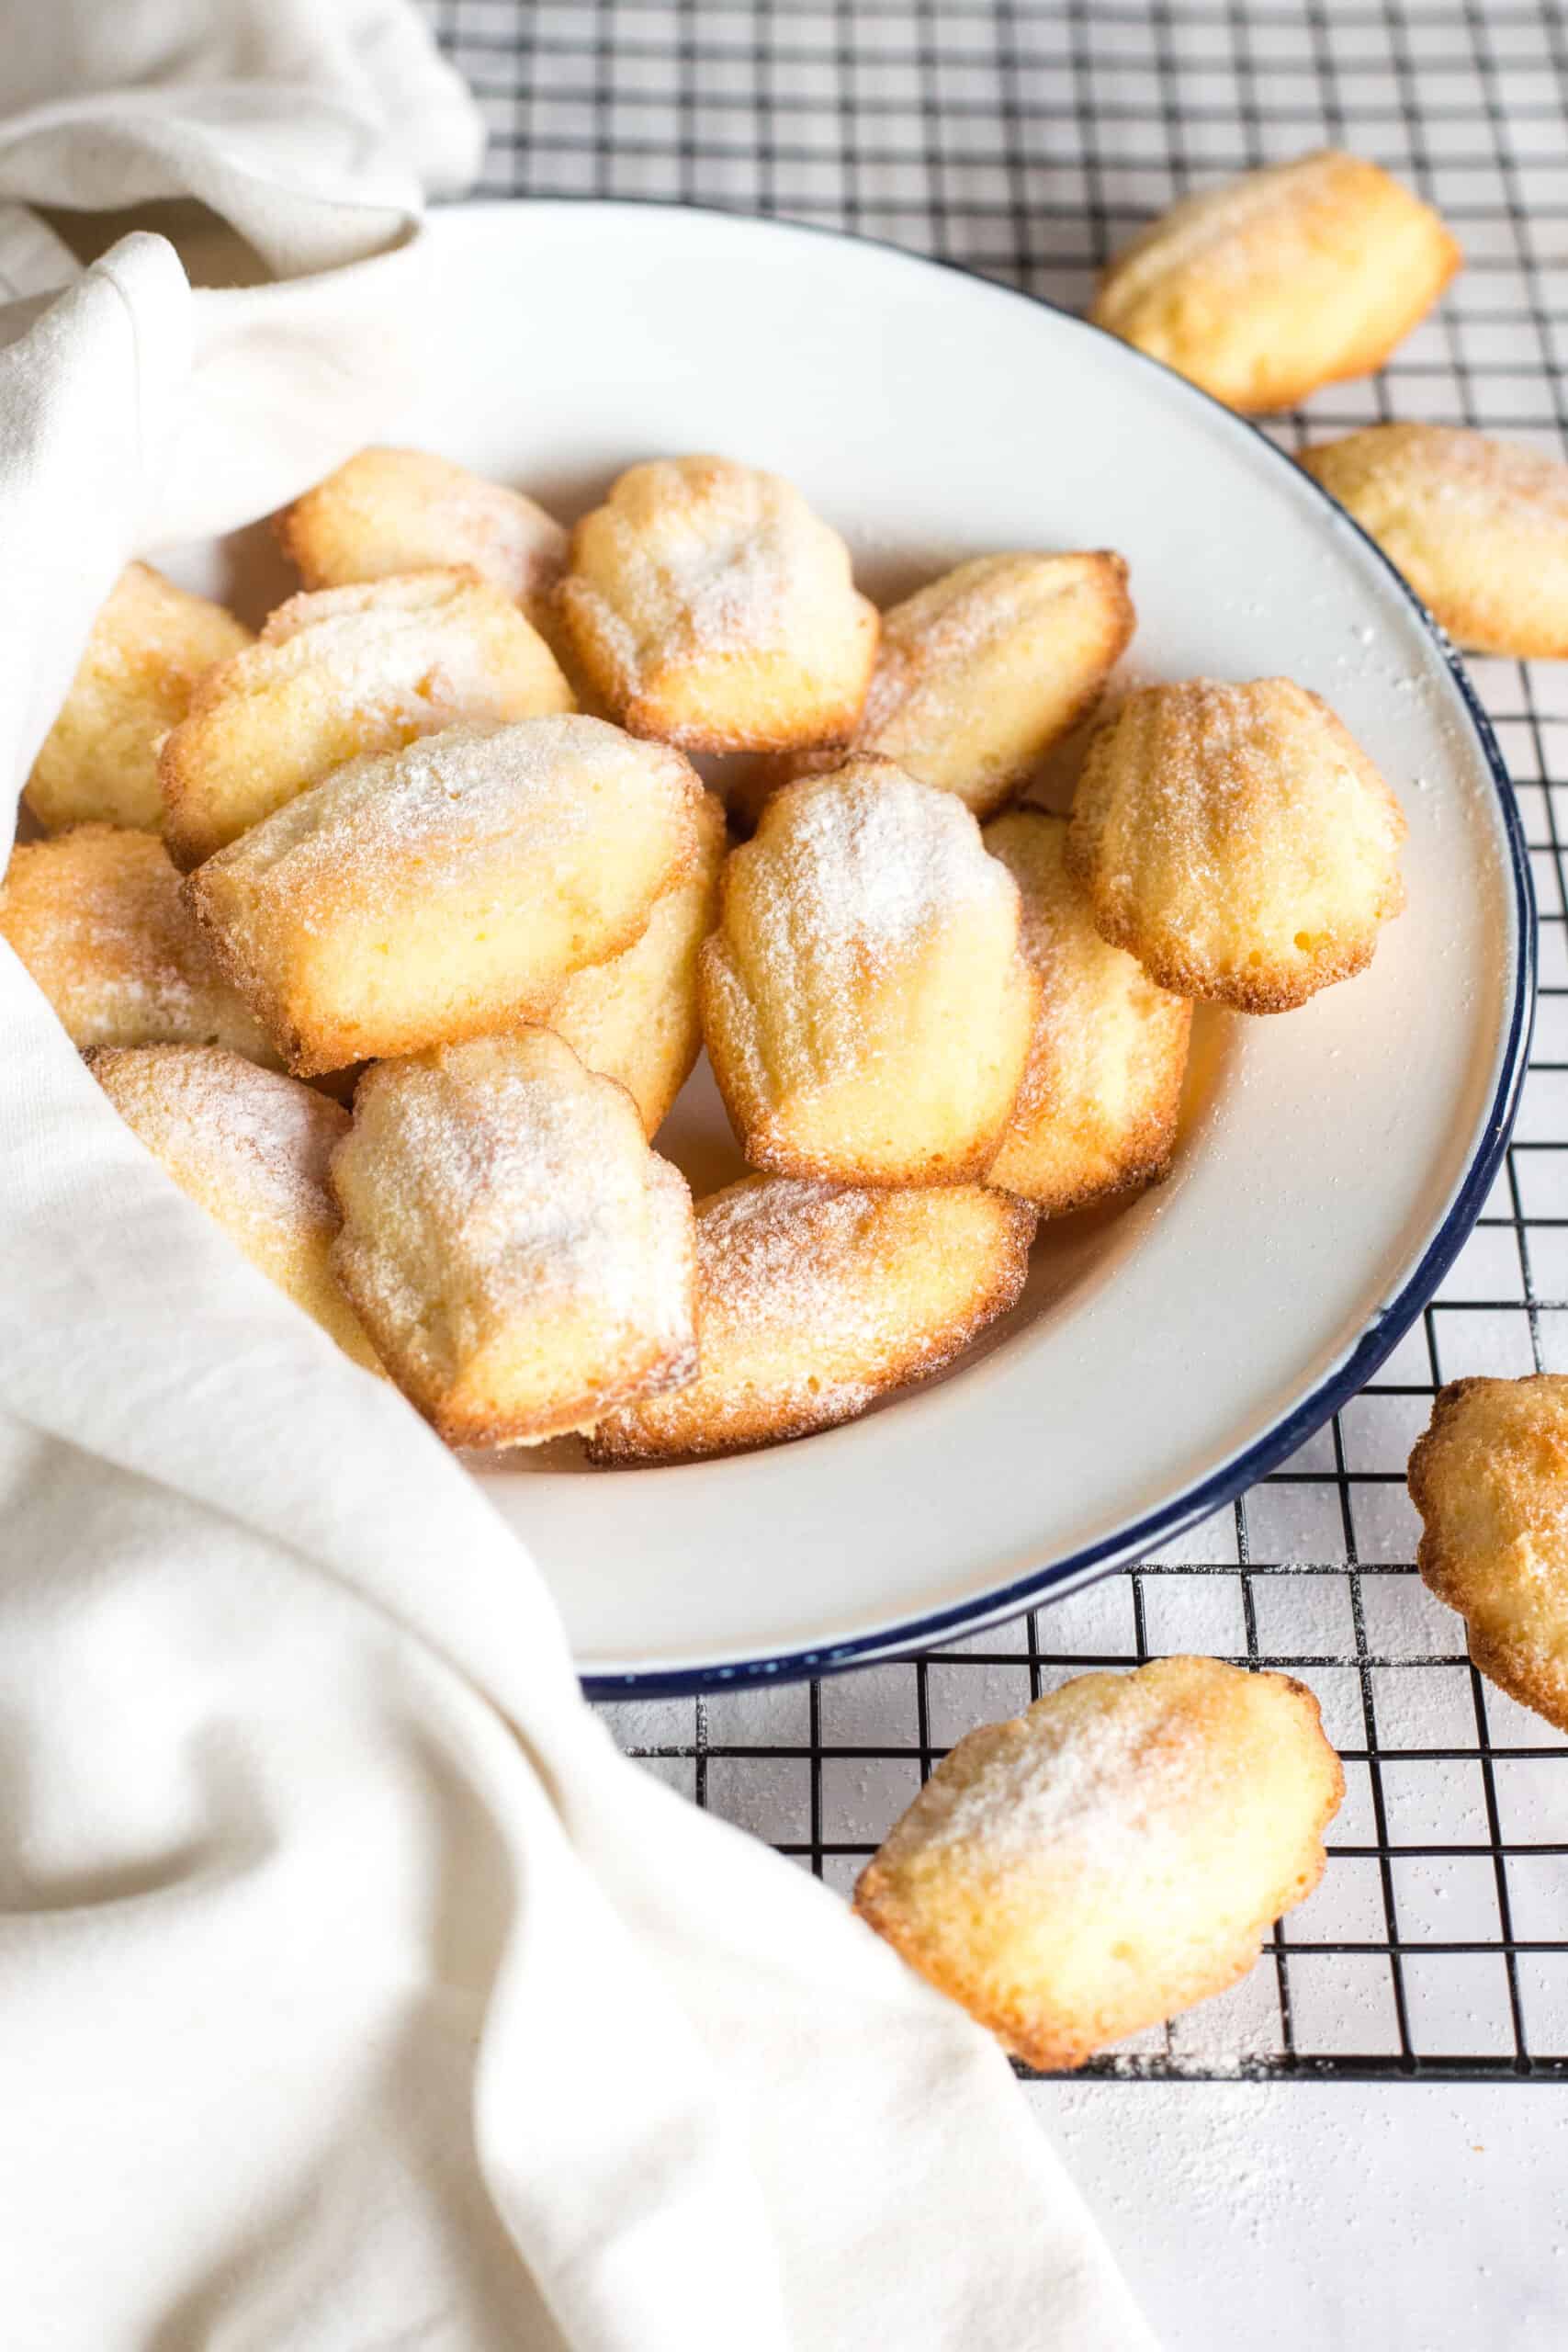 Gluten-free madeleines on a white place resting on a wire rack.